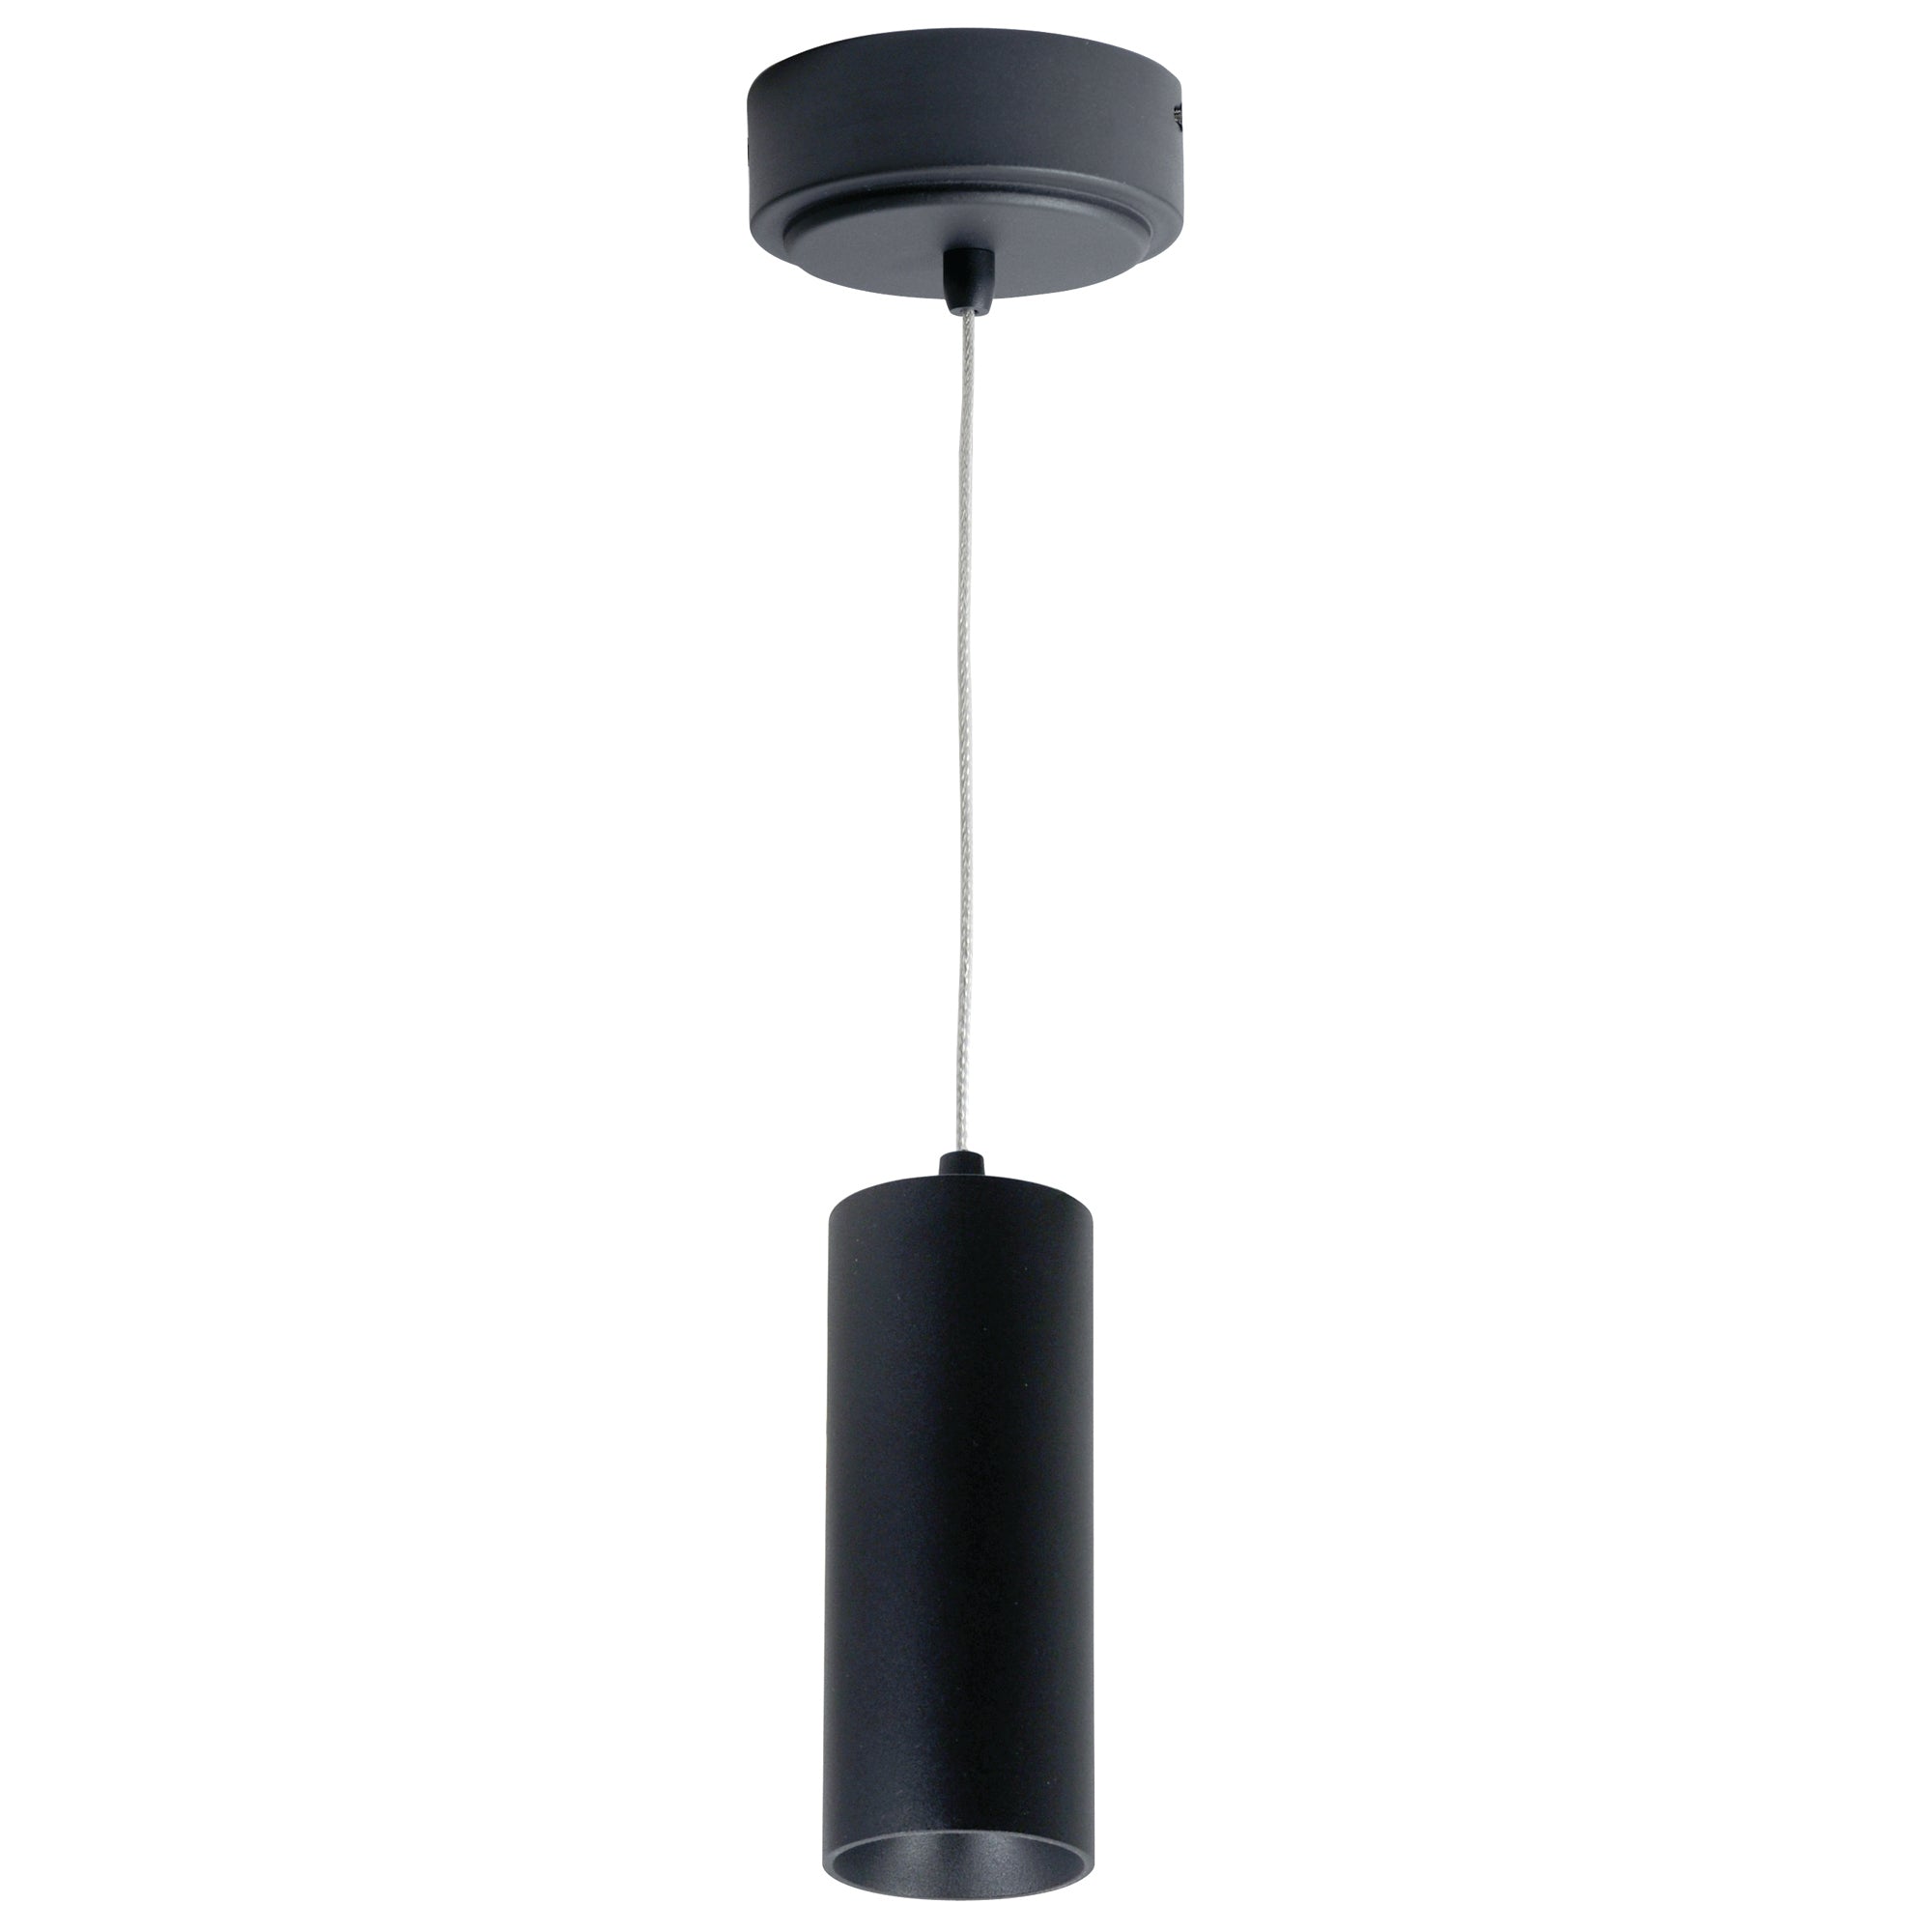 Nora Lighting LE56 - NYLM-2C30XBBLE4A - Cylinder - Black